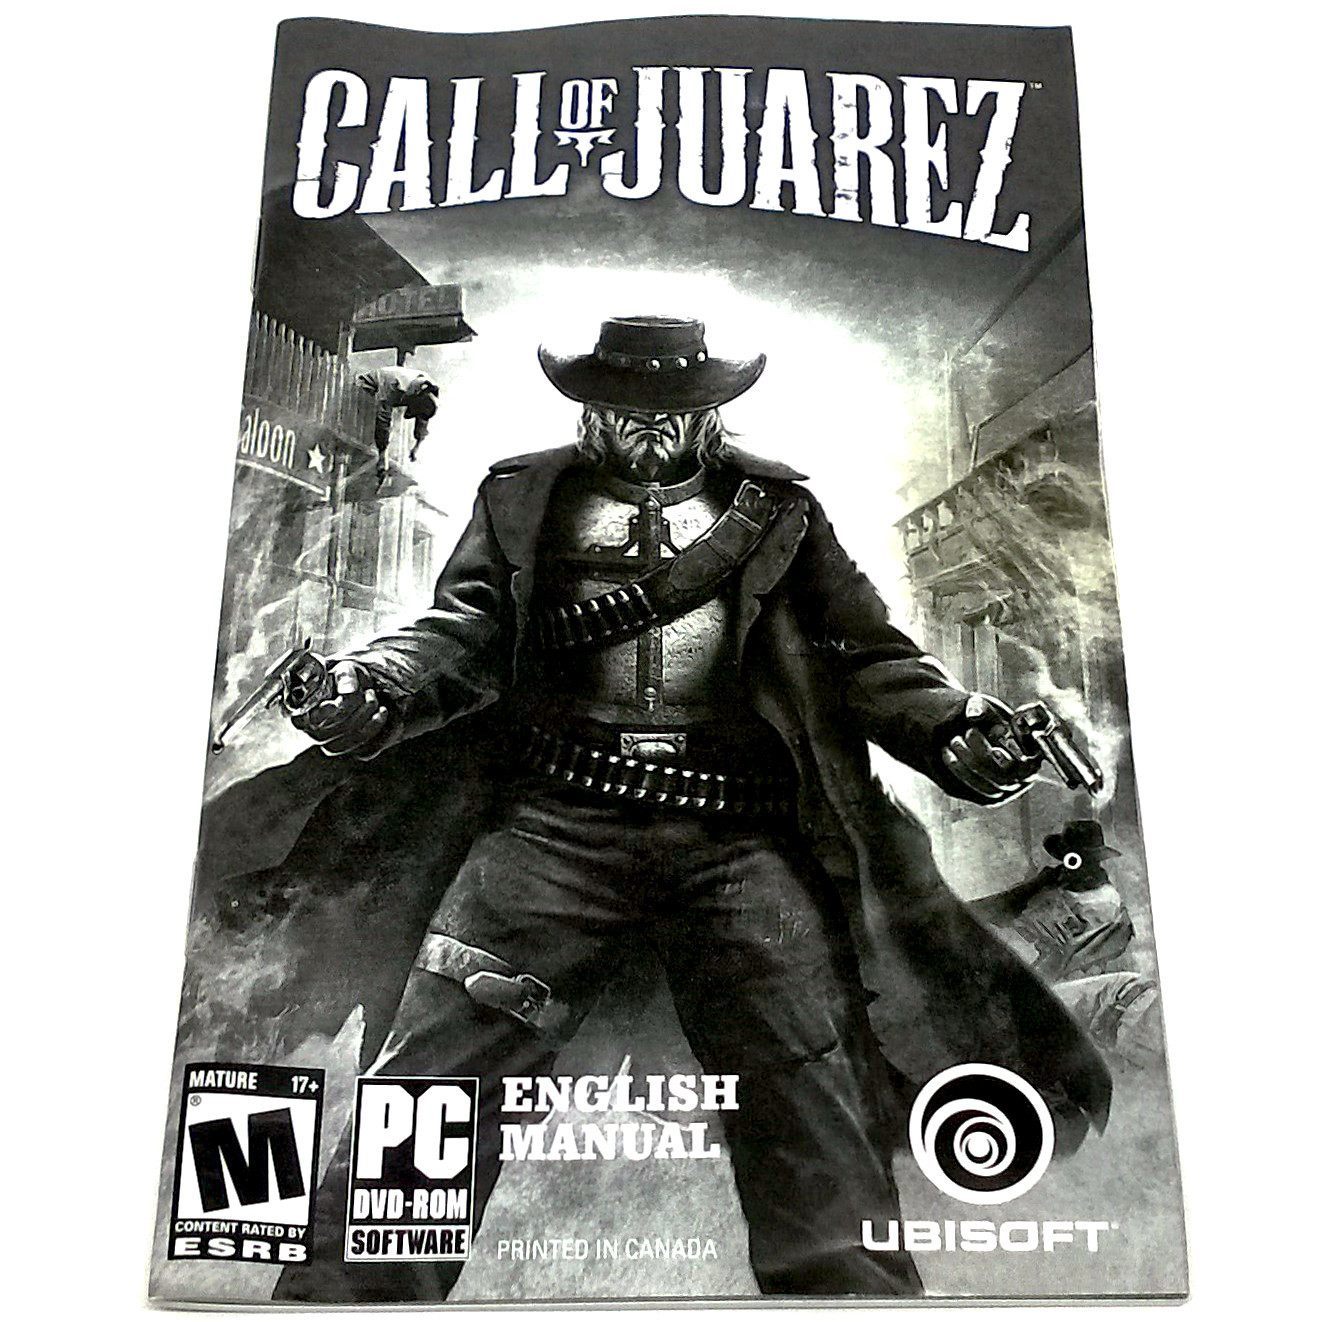 Call of Juarez for PC DVD-ROM - Front of manual